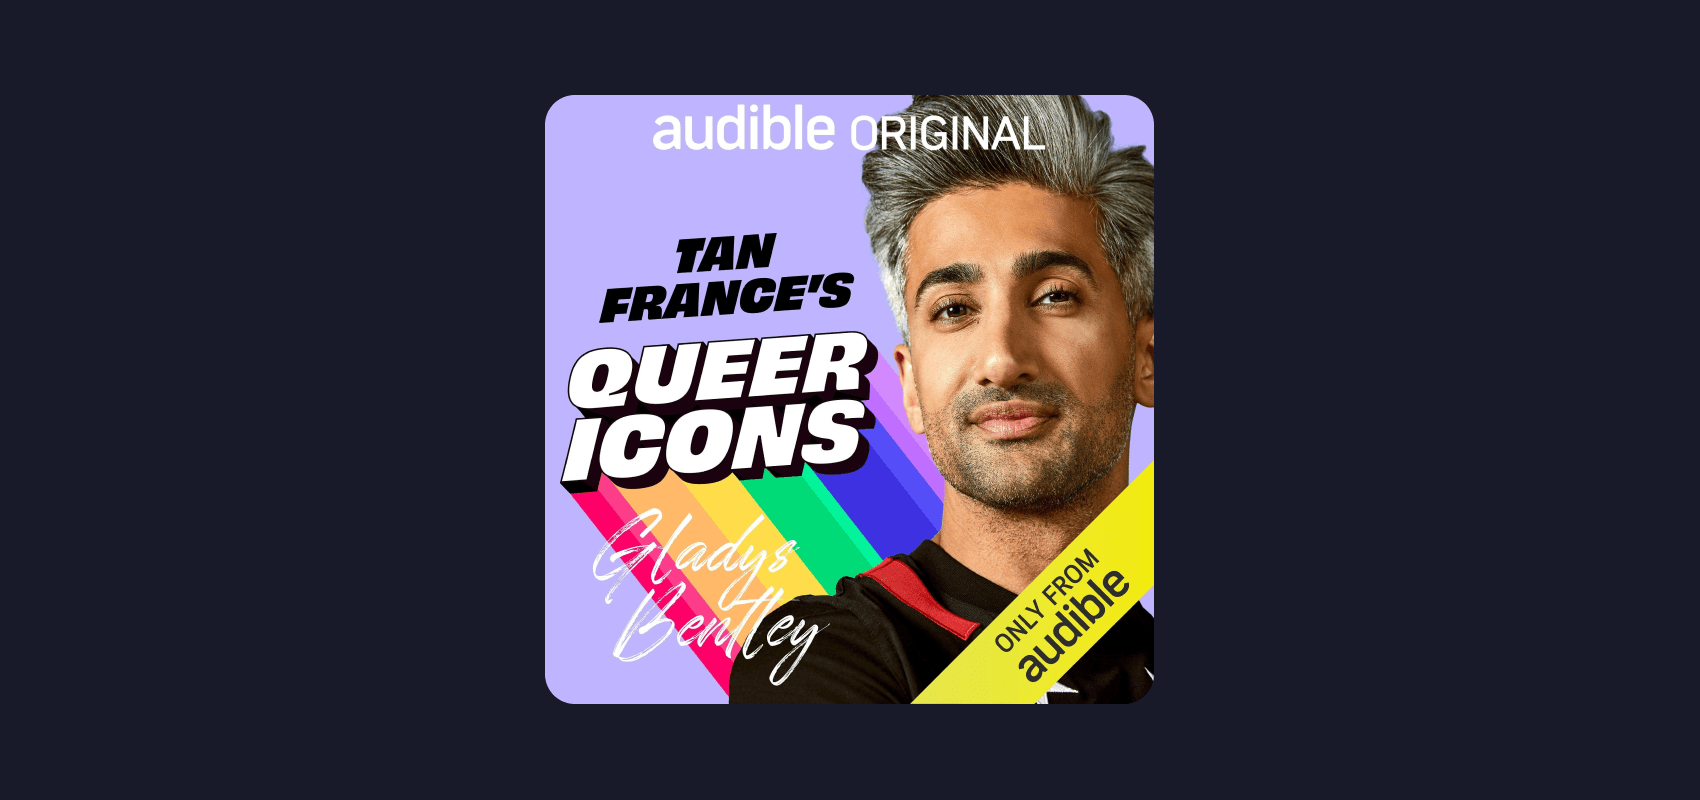 Tan France's Queer Icons cover